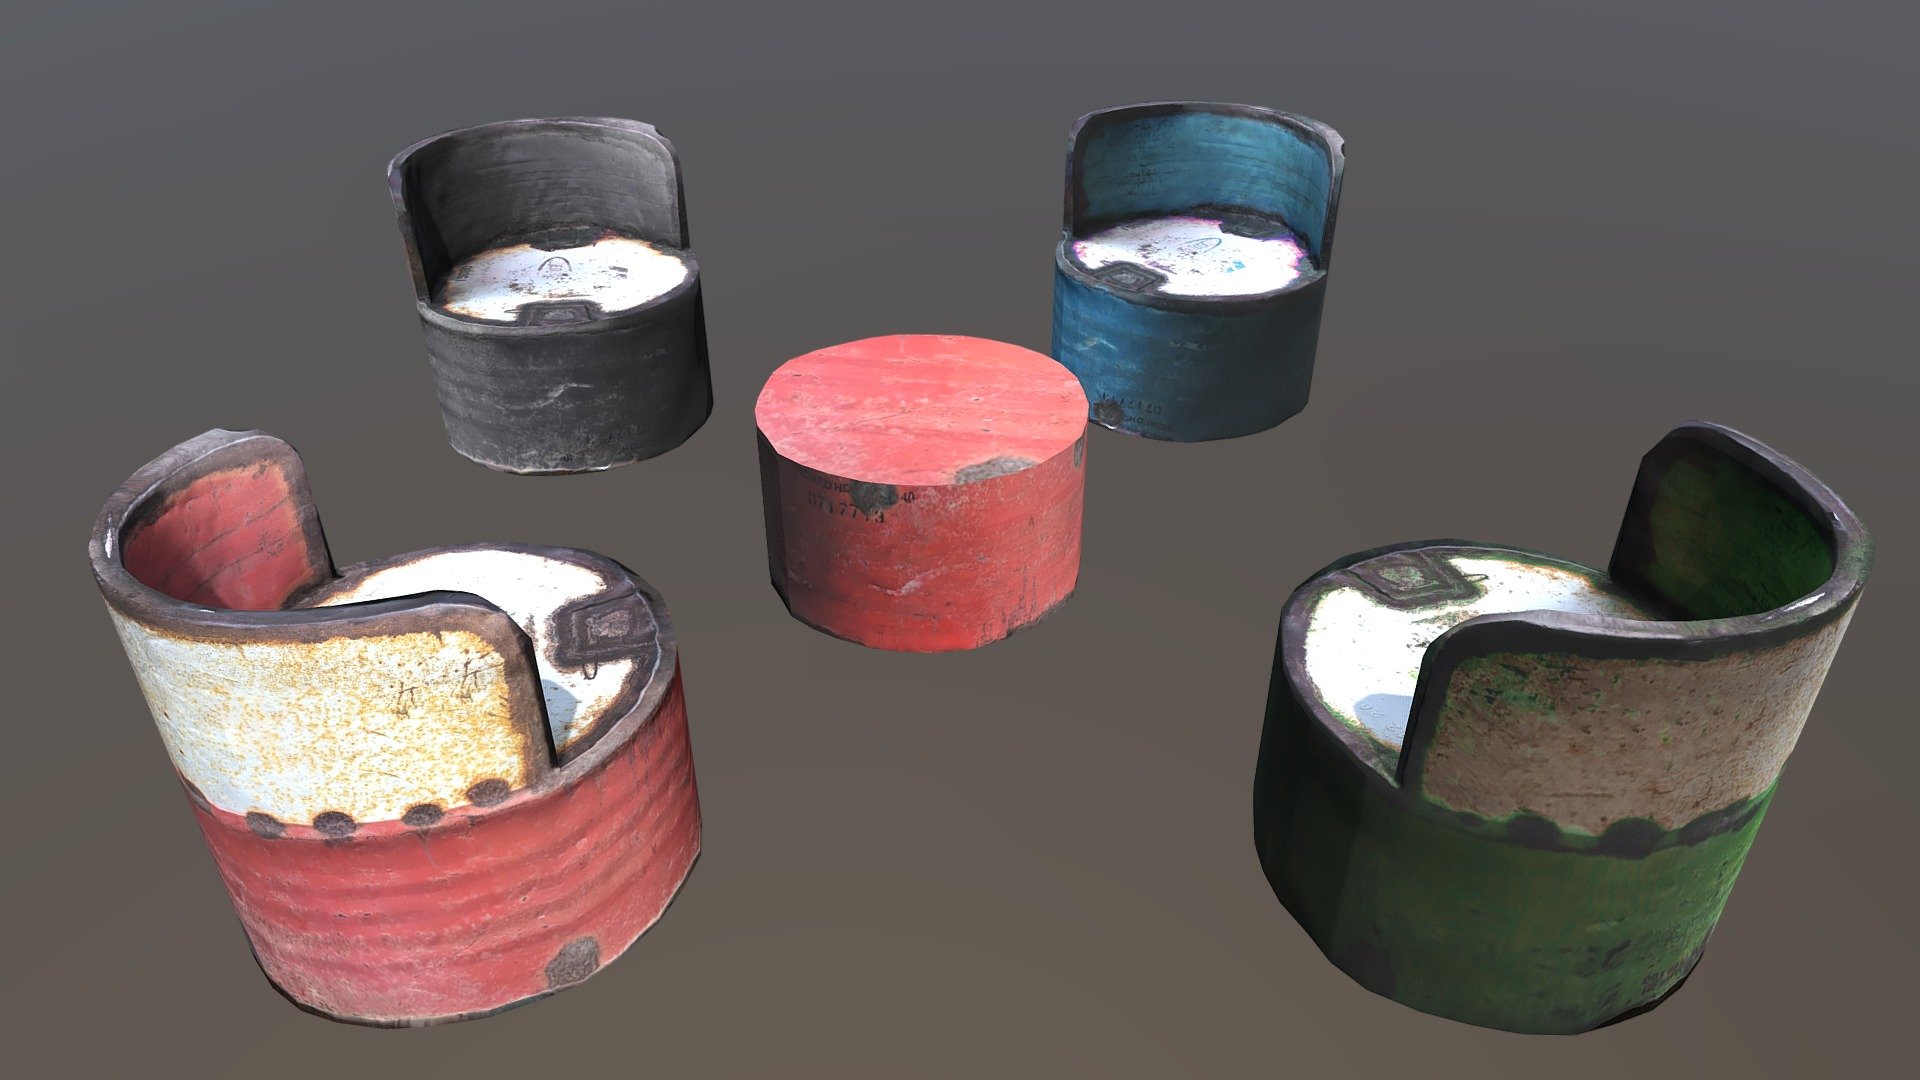 &ldquo;Explore this unique collection of 3D Scanned and masterfully crafted LowPoly Barrel Furniture, perfect for adding a touch of post-apocalyptic style to your virtual world. These meticulously Upcycled Chairs and table are ready to bring character to any Fallout Style game environment. Made from Petrol Barrels, this chair collection comes in four distinctive colors: Green, Red, Blue, and Black. Each piece has been meticulously edited in Blender to ensure a seamless fit in your virtual world. Whether you're working on a Gaming Asset, need some Rustic Decor, or want to create an Industrial Design atmosphere, these chairs and table, inspired by a Retro Aesthetic, offer Distinctive Furniture that adds a unique touch to any setting. Crafted from Salvaged Materials, these pieces are the perfect addition to any Post-Apocalyptic Decor in your virtual world, enhancing your Environmental Assets collection and bringing a touch of vintage charm.